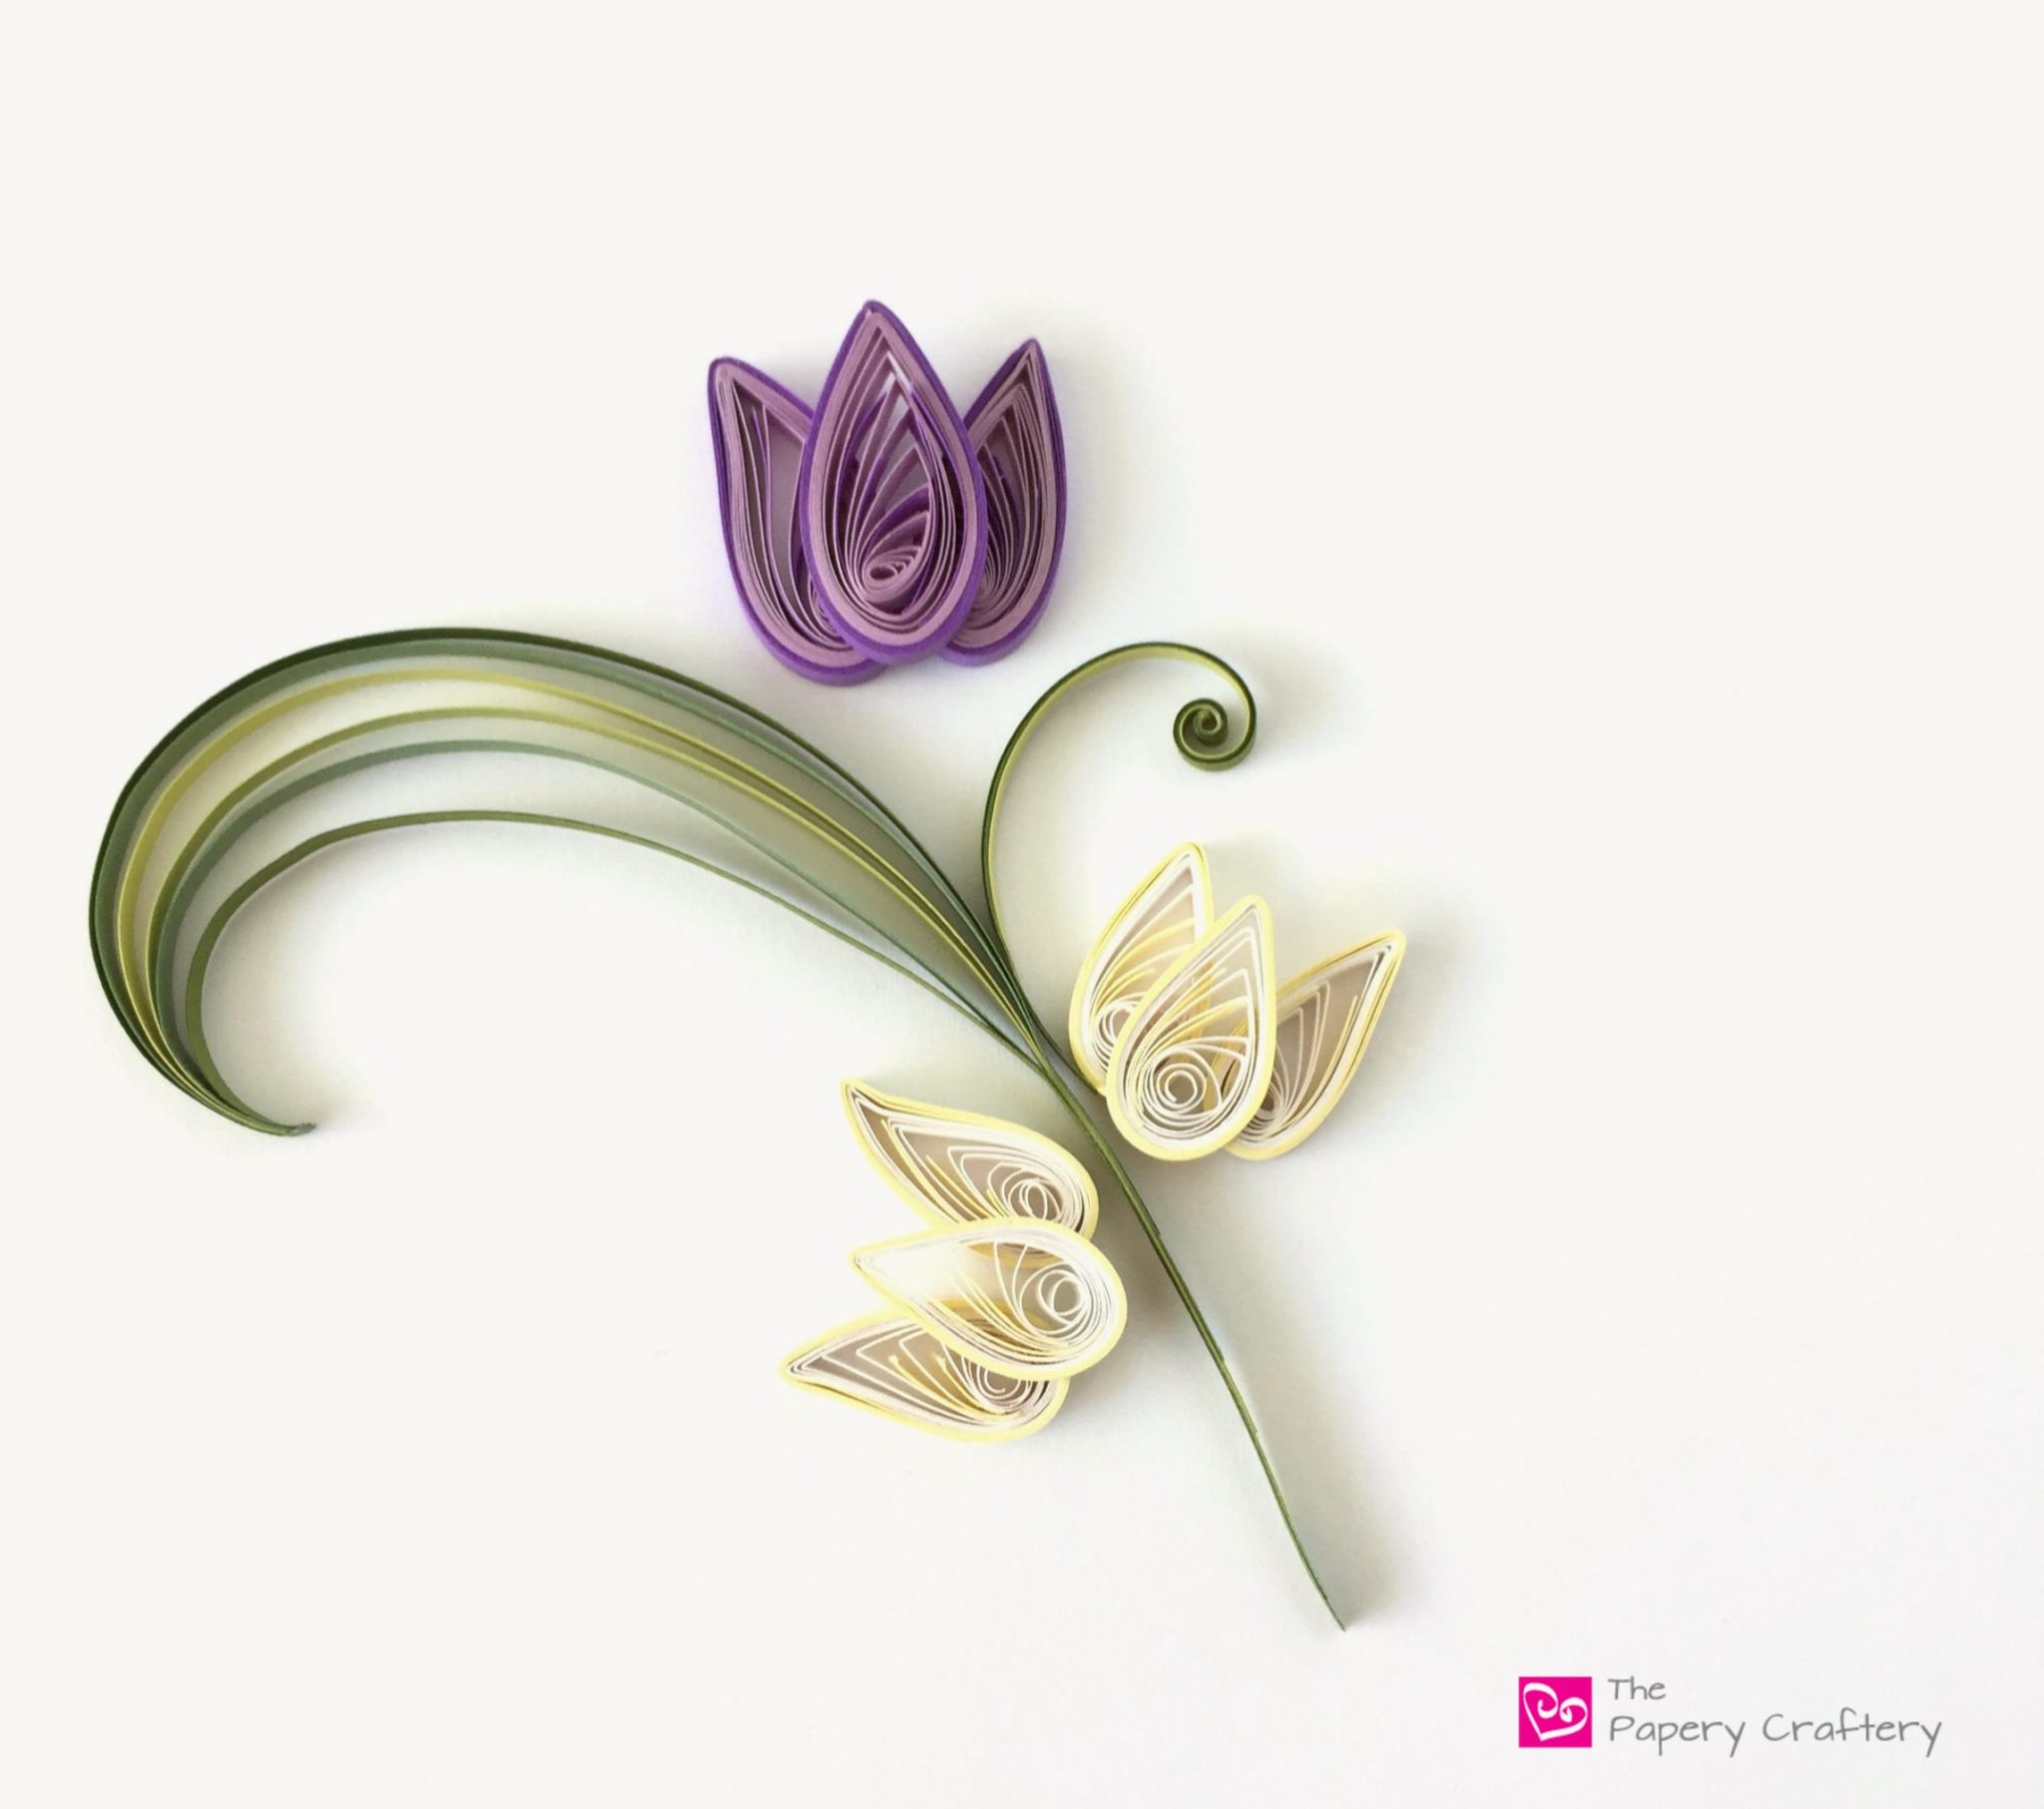 The Ultimate Paper Quilling Tutorial for Beginners